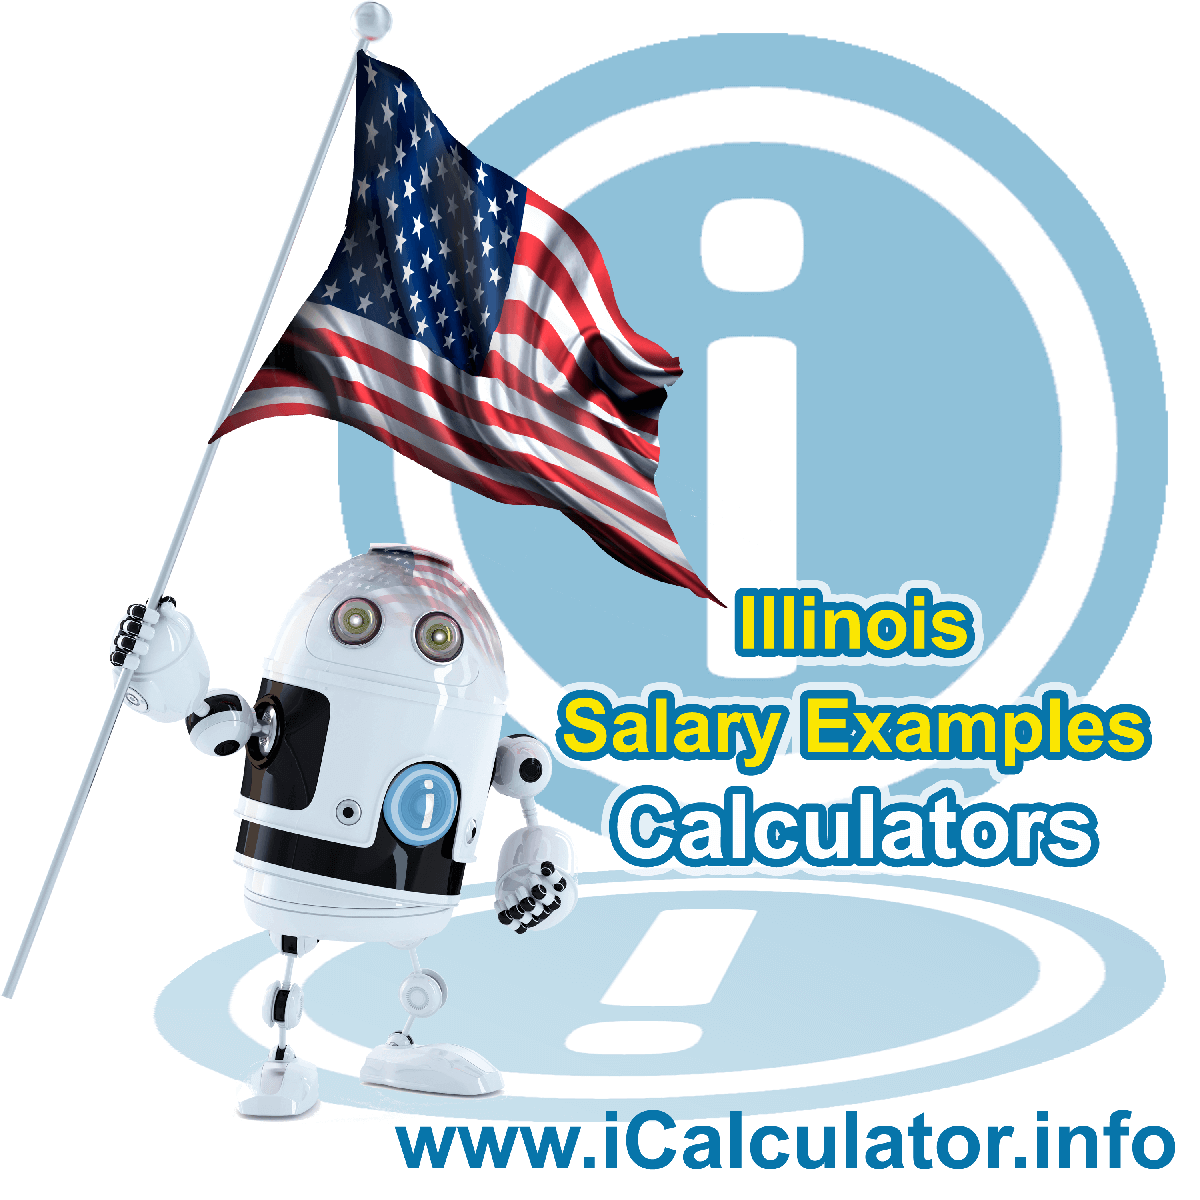 Illinois Salary Example for $ 20,000.00 in 2023 | iCalculator™ | $ 20,000.00 salary example for employee and employer paying Illinois State tincome taxes. Detailed salary after tax calculation including Illinois State Tax, Federal State Tax, Medicare Deductions, Social Security, Capital Gains and other income tax and salary deductions complete with supporting Illinois state tax tables 